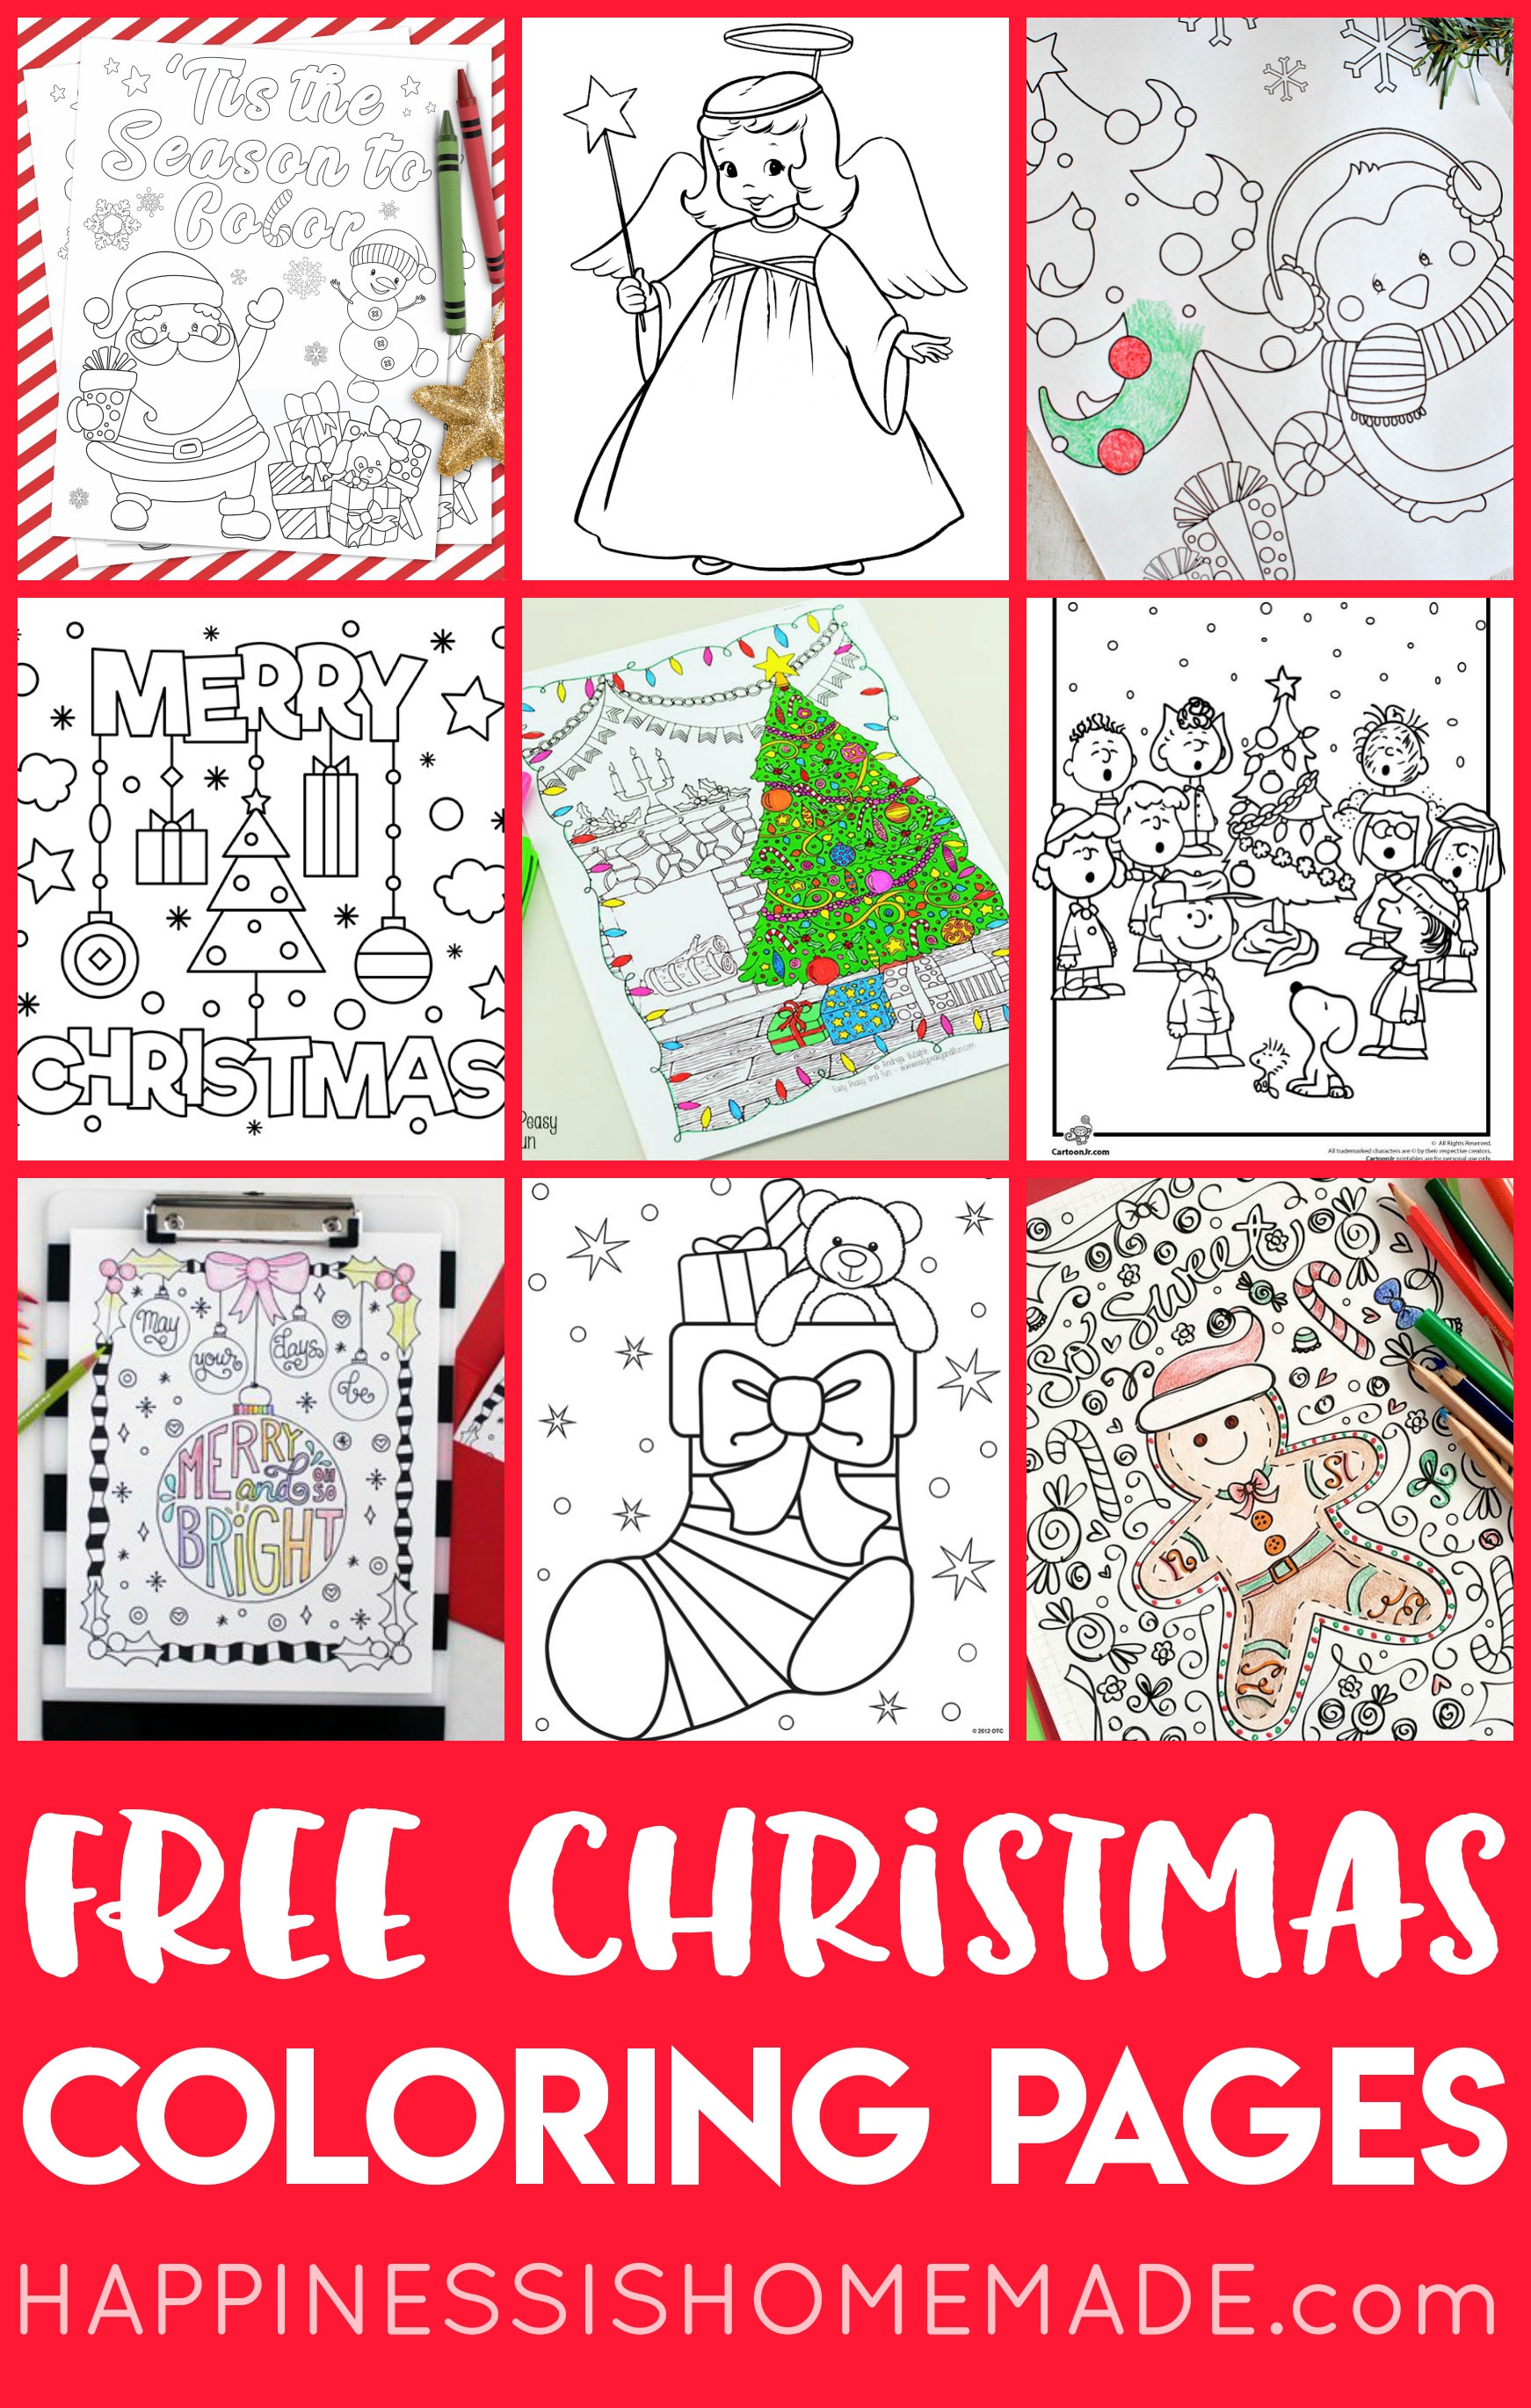 Free Christmas Coloring Pages For Adults And Kids - Happiness Is - Free Printable Christmas Art